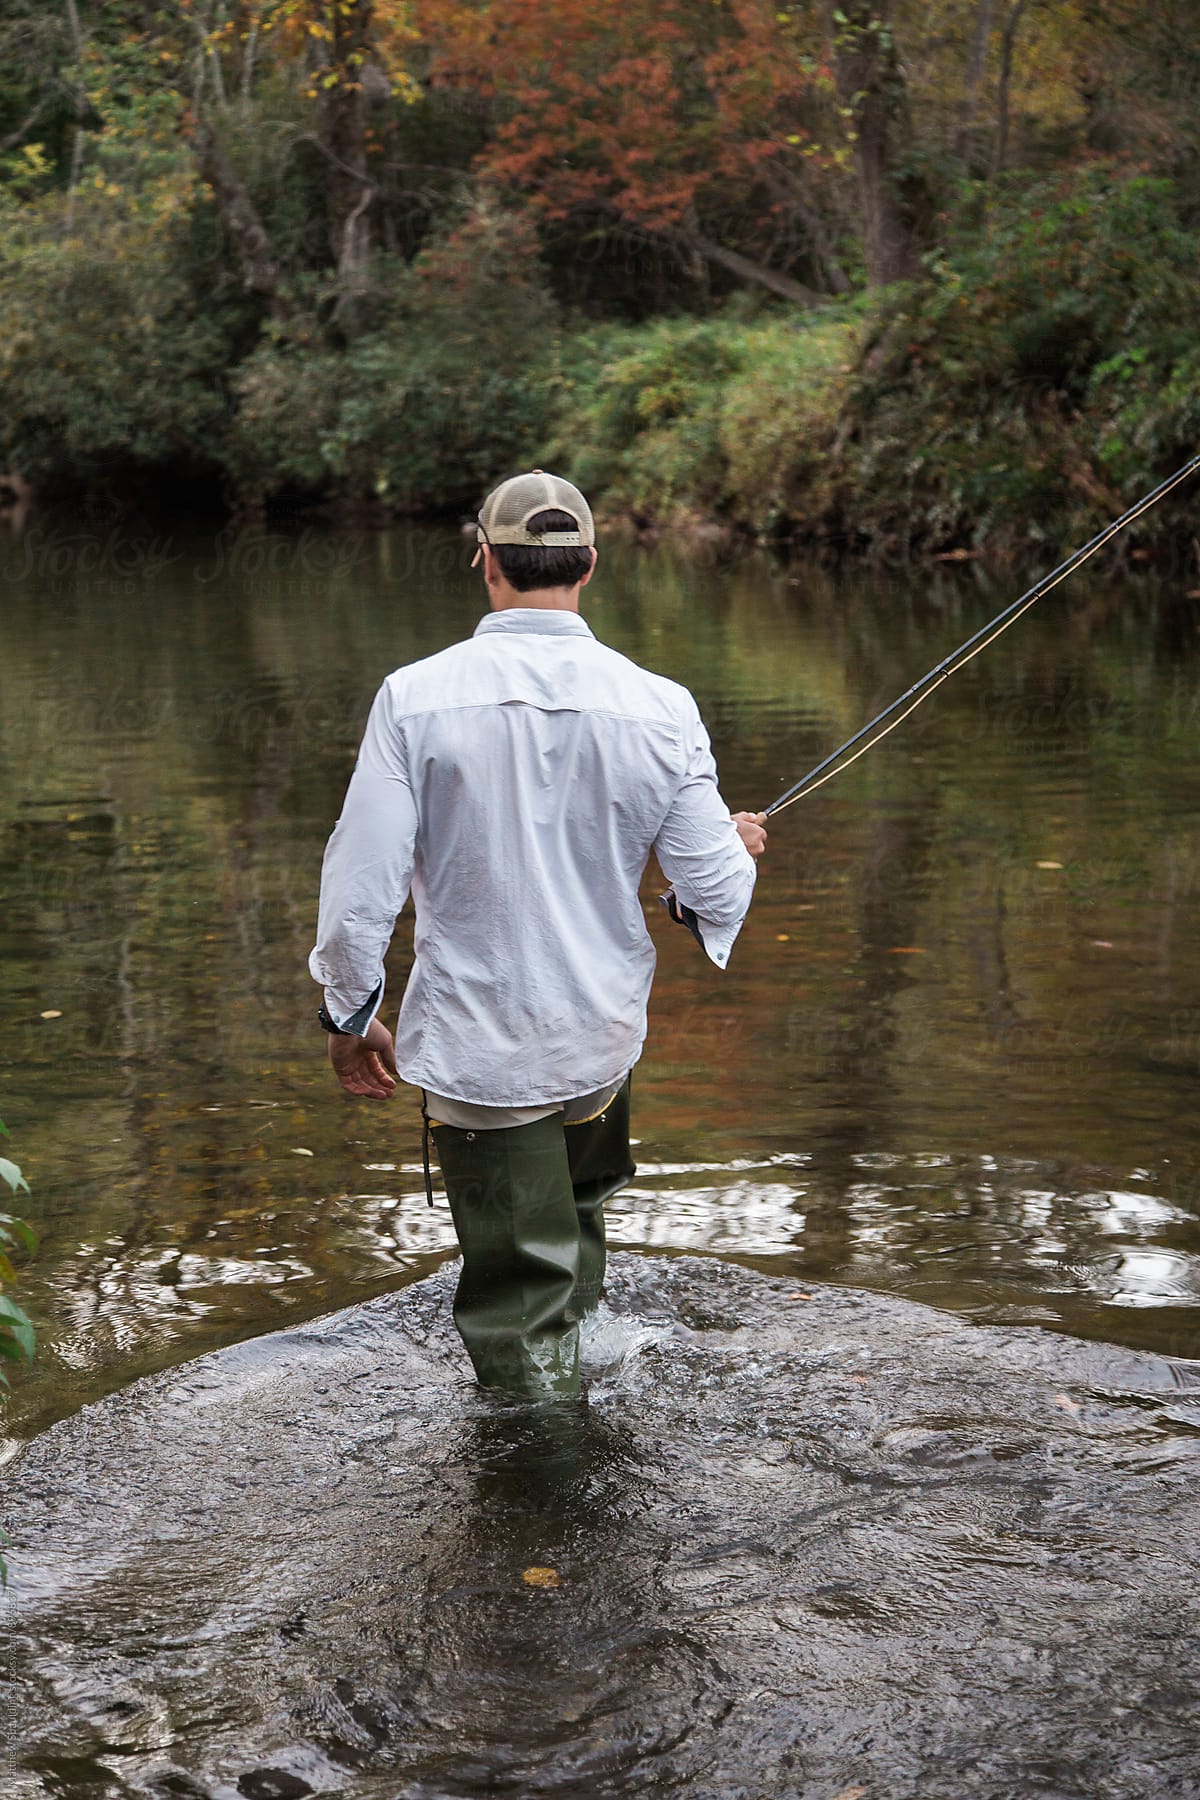 Fisherman Fly-fishing And Wading In Stream At Dusk by Stocksy Contributor Matthew  Spaulding - Stocksy